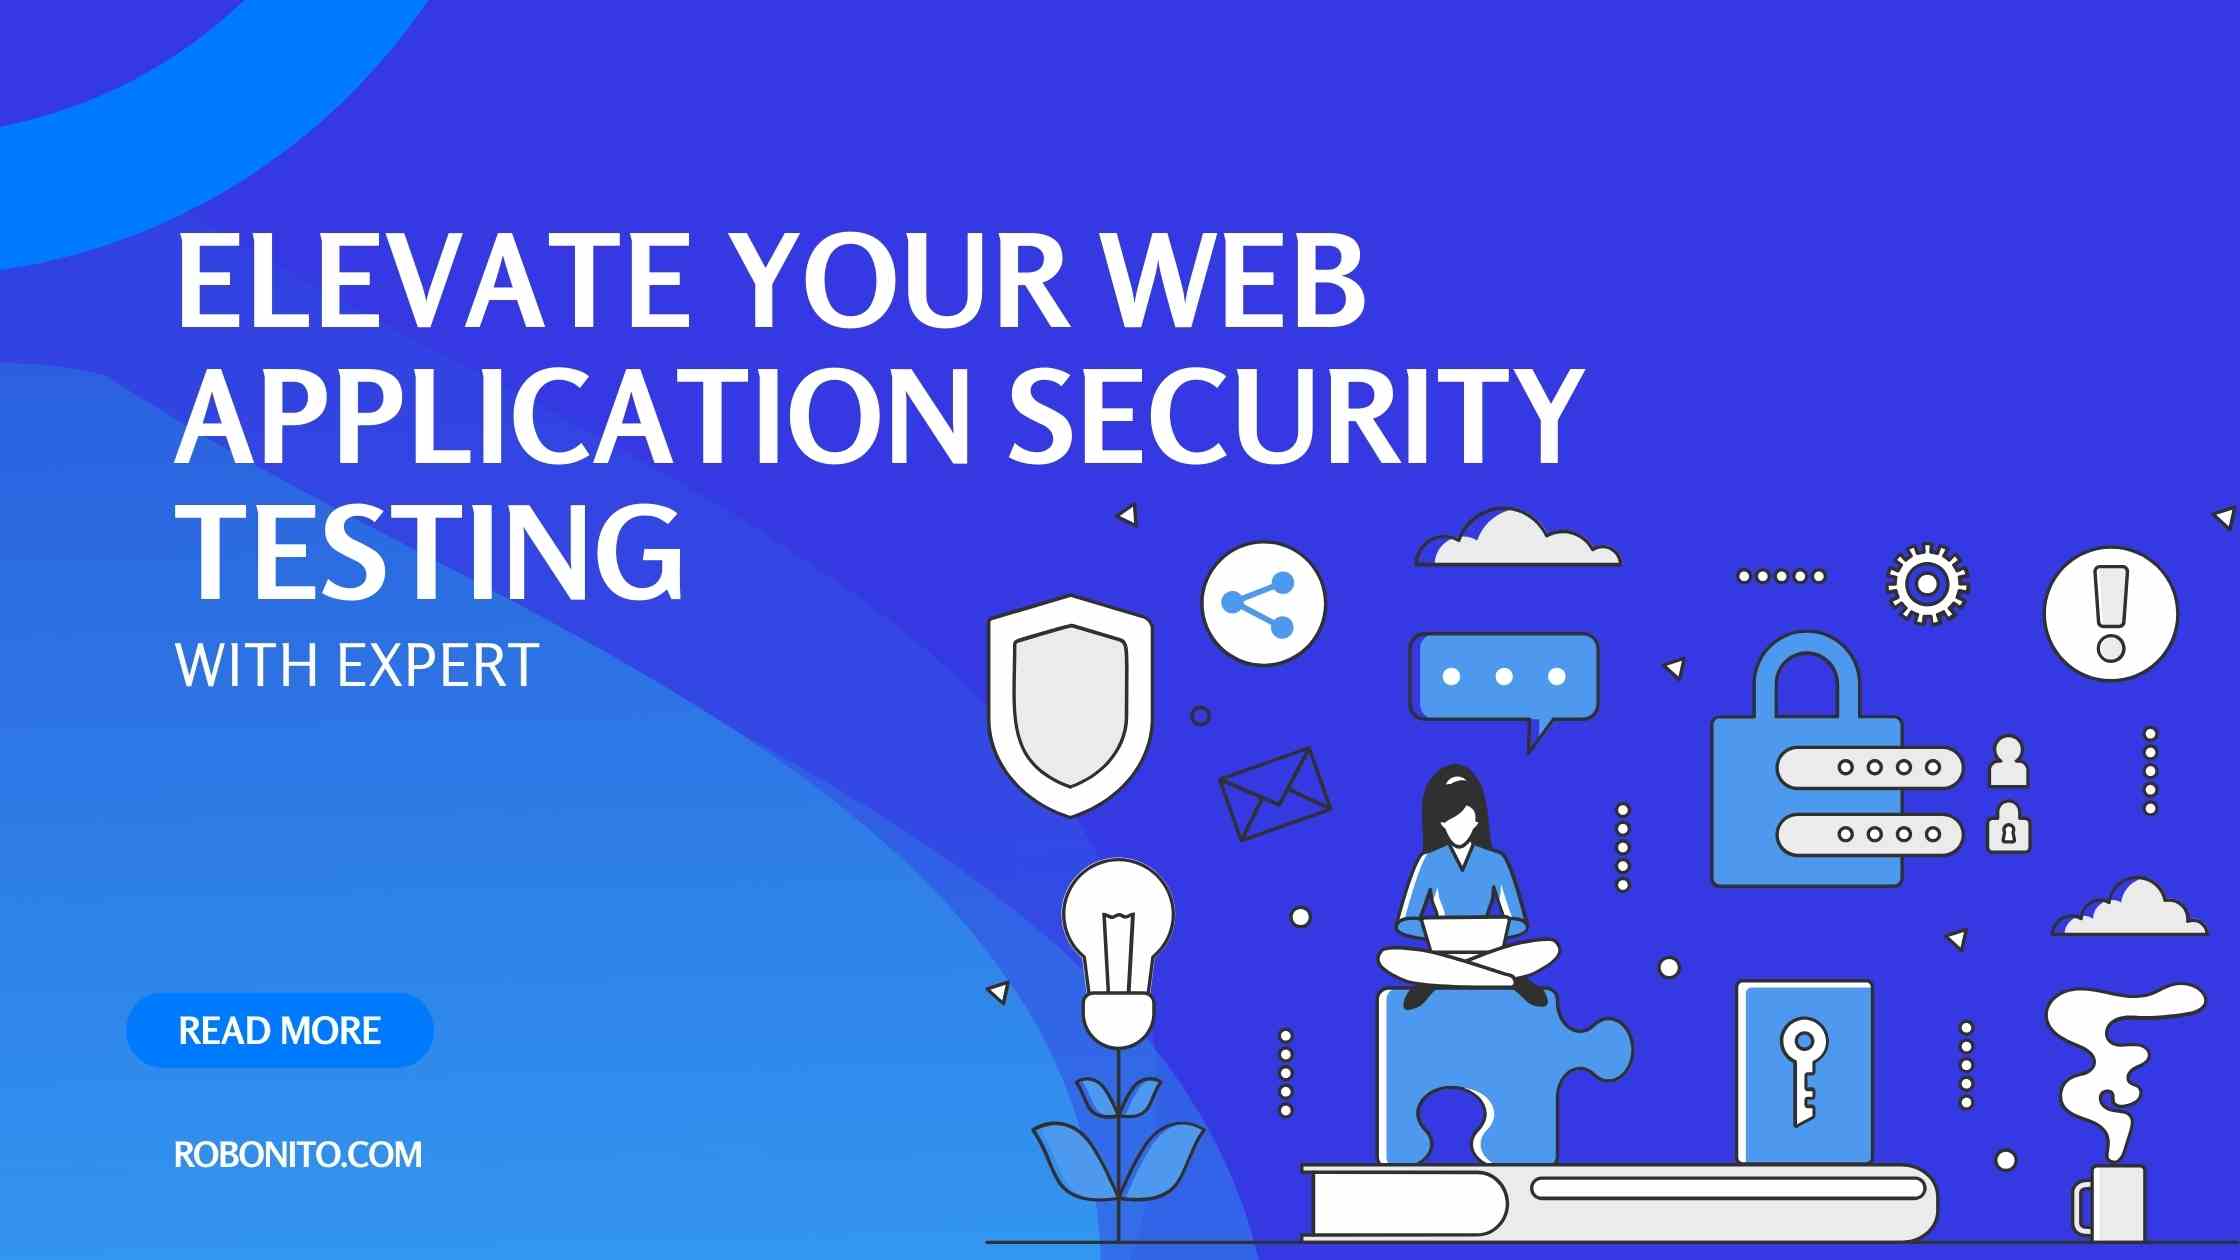 Elevate Your Web Application Security Testing with Expert